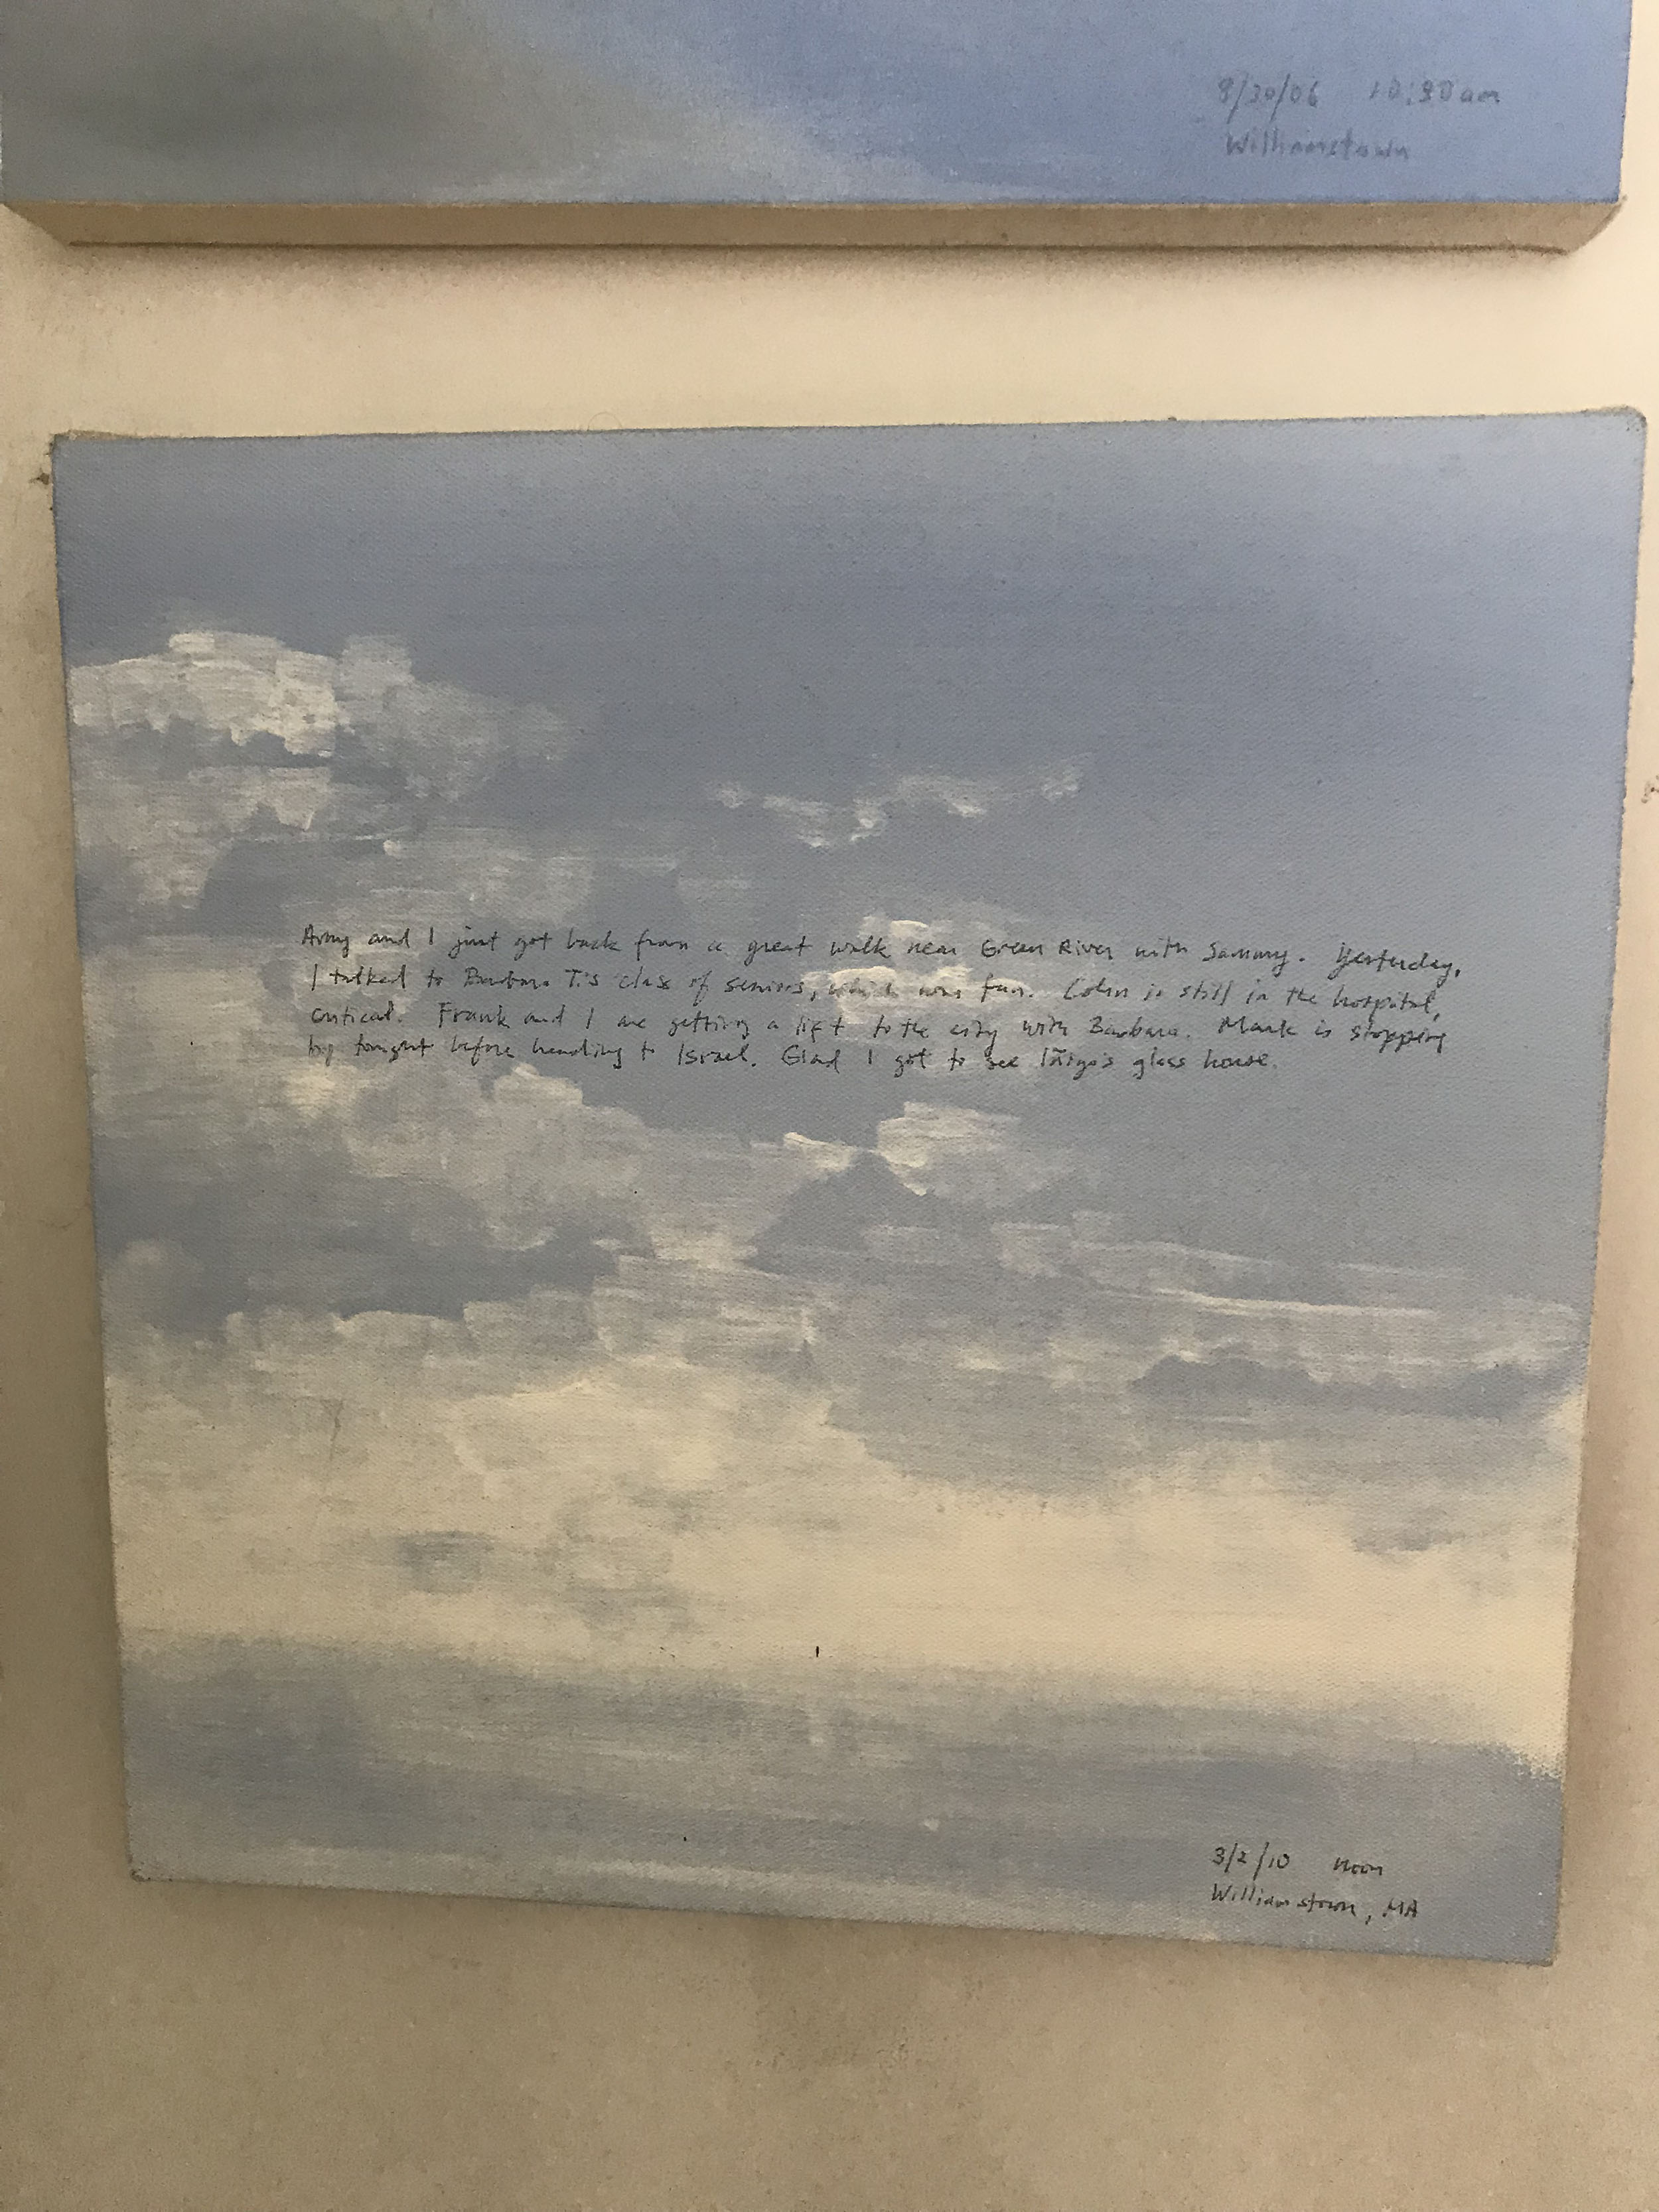 A 14 × 14 inch, acrylic painting of the sky. A journal entry is handwritten on the painting:

“Amy and I just got back from a great walk near Green River with Sammy. Yesterday, I talked to Barbara T.’s class of seniors, which was fun. Colin is still in the hospital, critical. Frank and I are getting a lift to the city with Barbara. Mark is stopping by tonight before heading to Israel. Glad I got to see Iñigo’s glass house.

3/2/10 noon
Williamstown, MA”